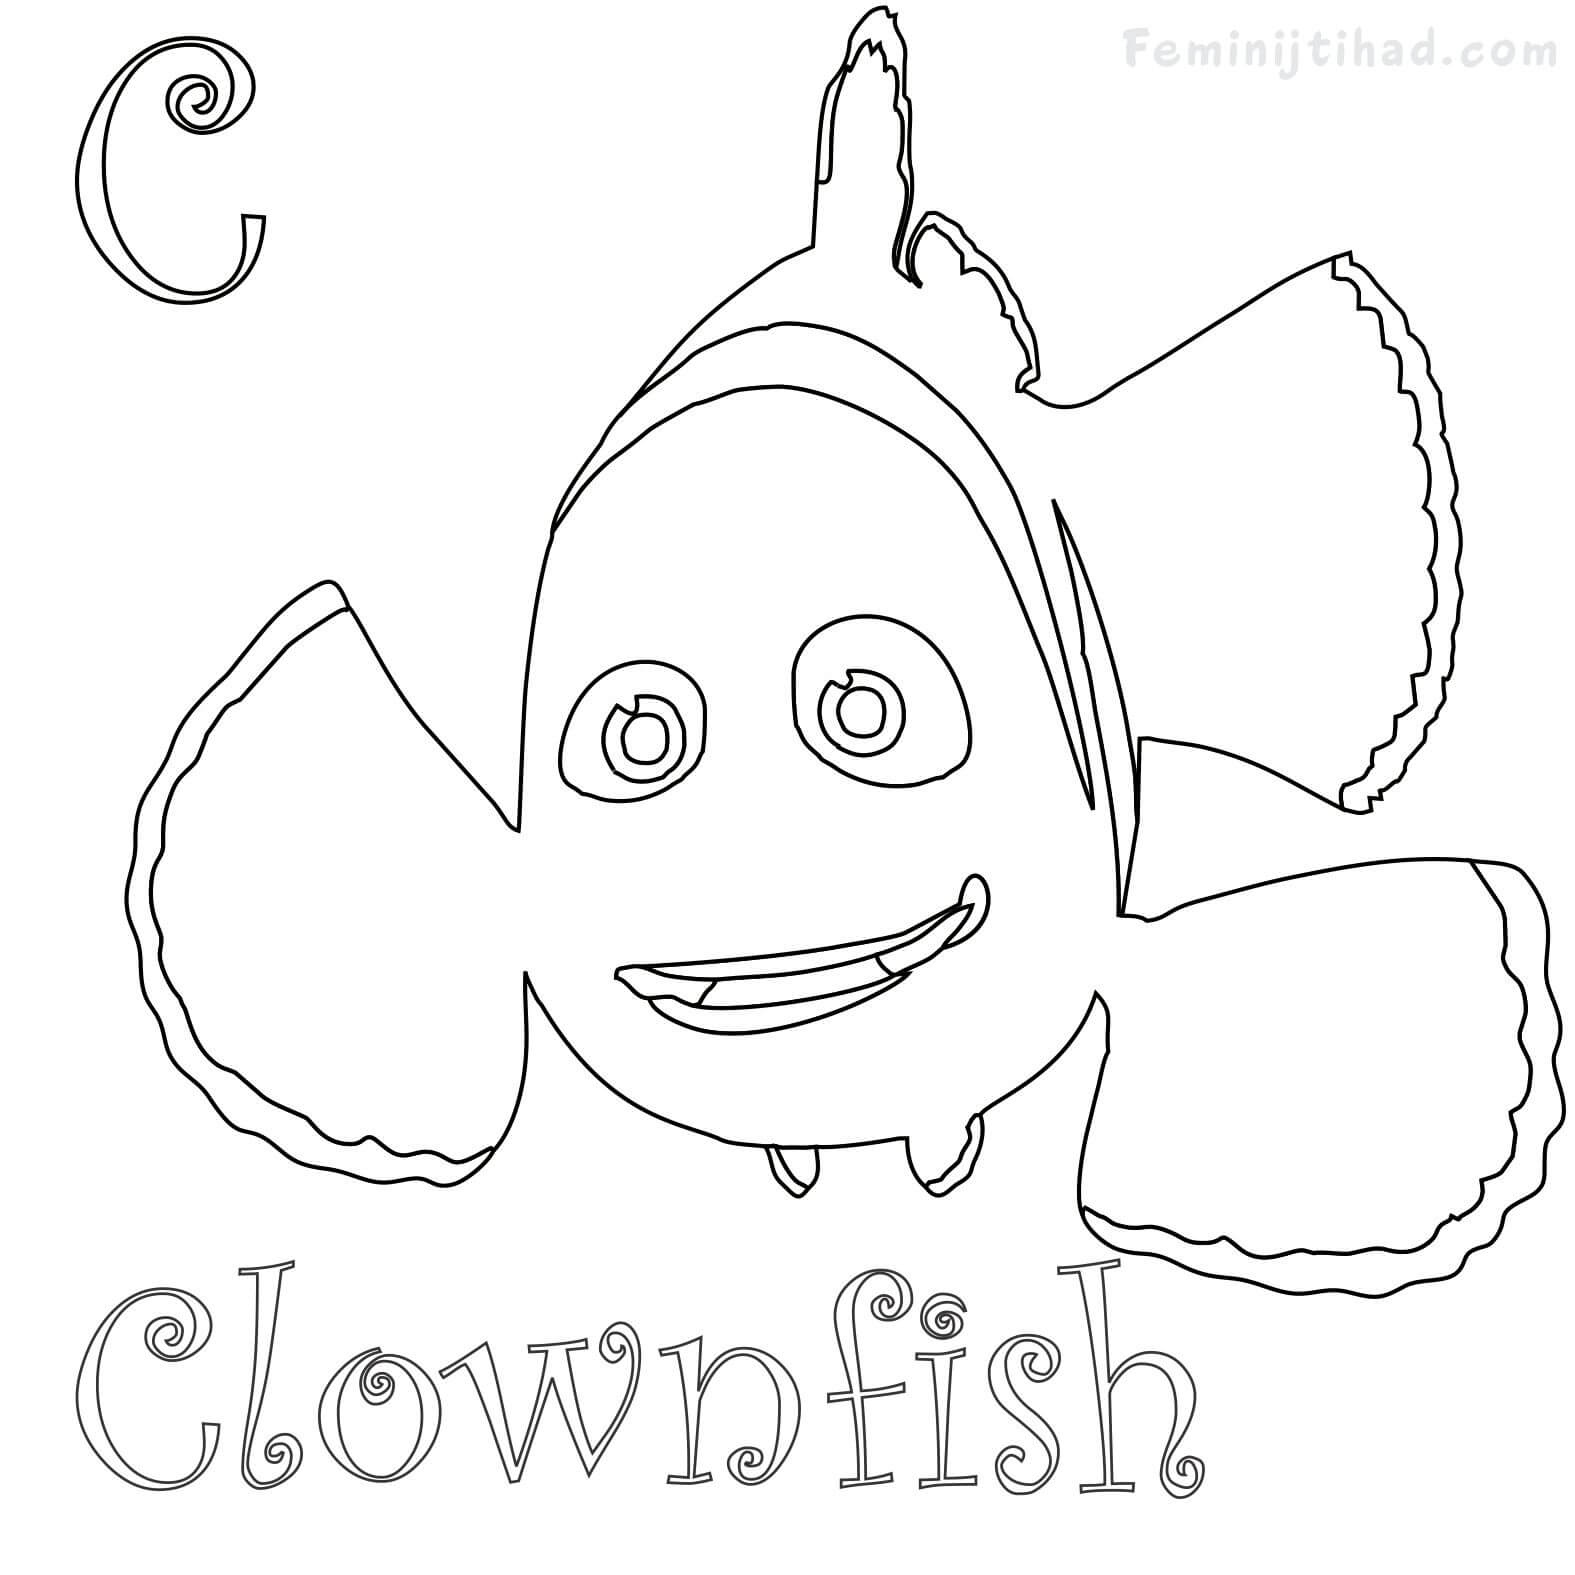 coloring page of clown fish free